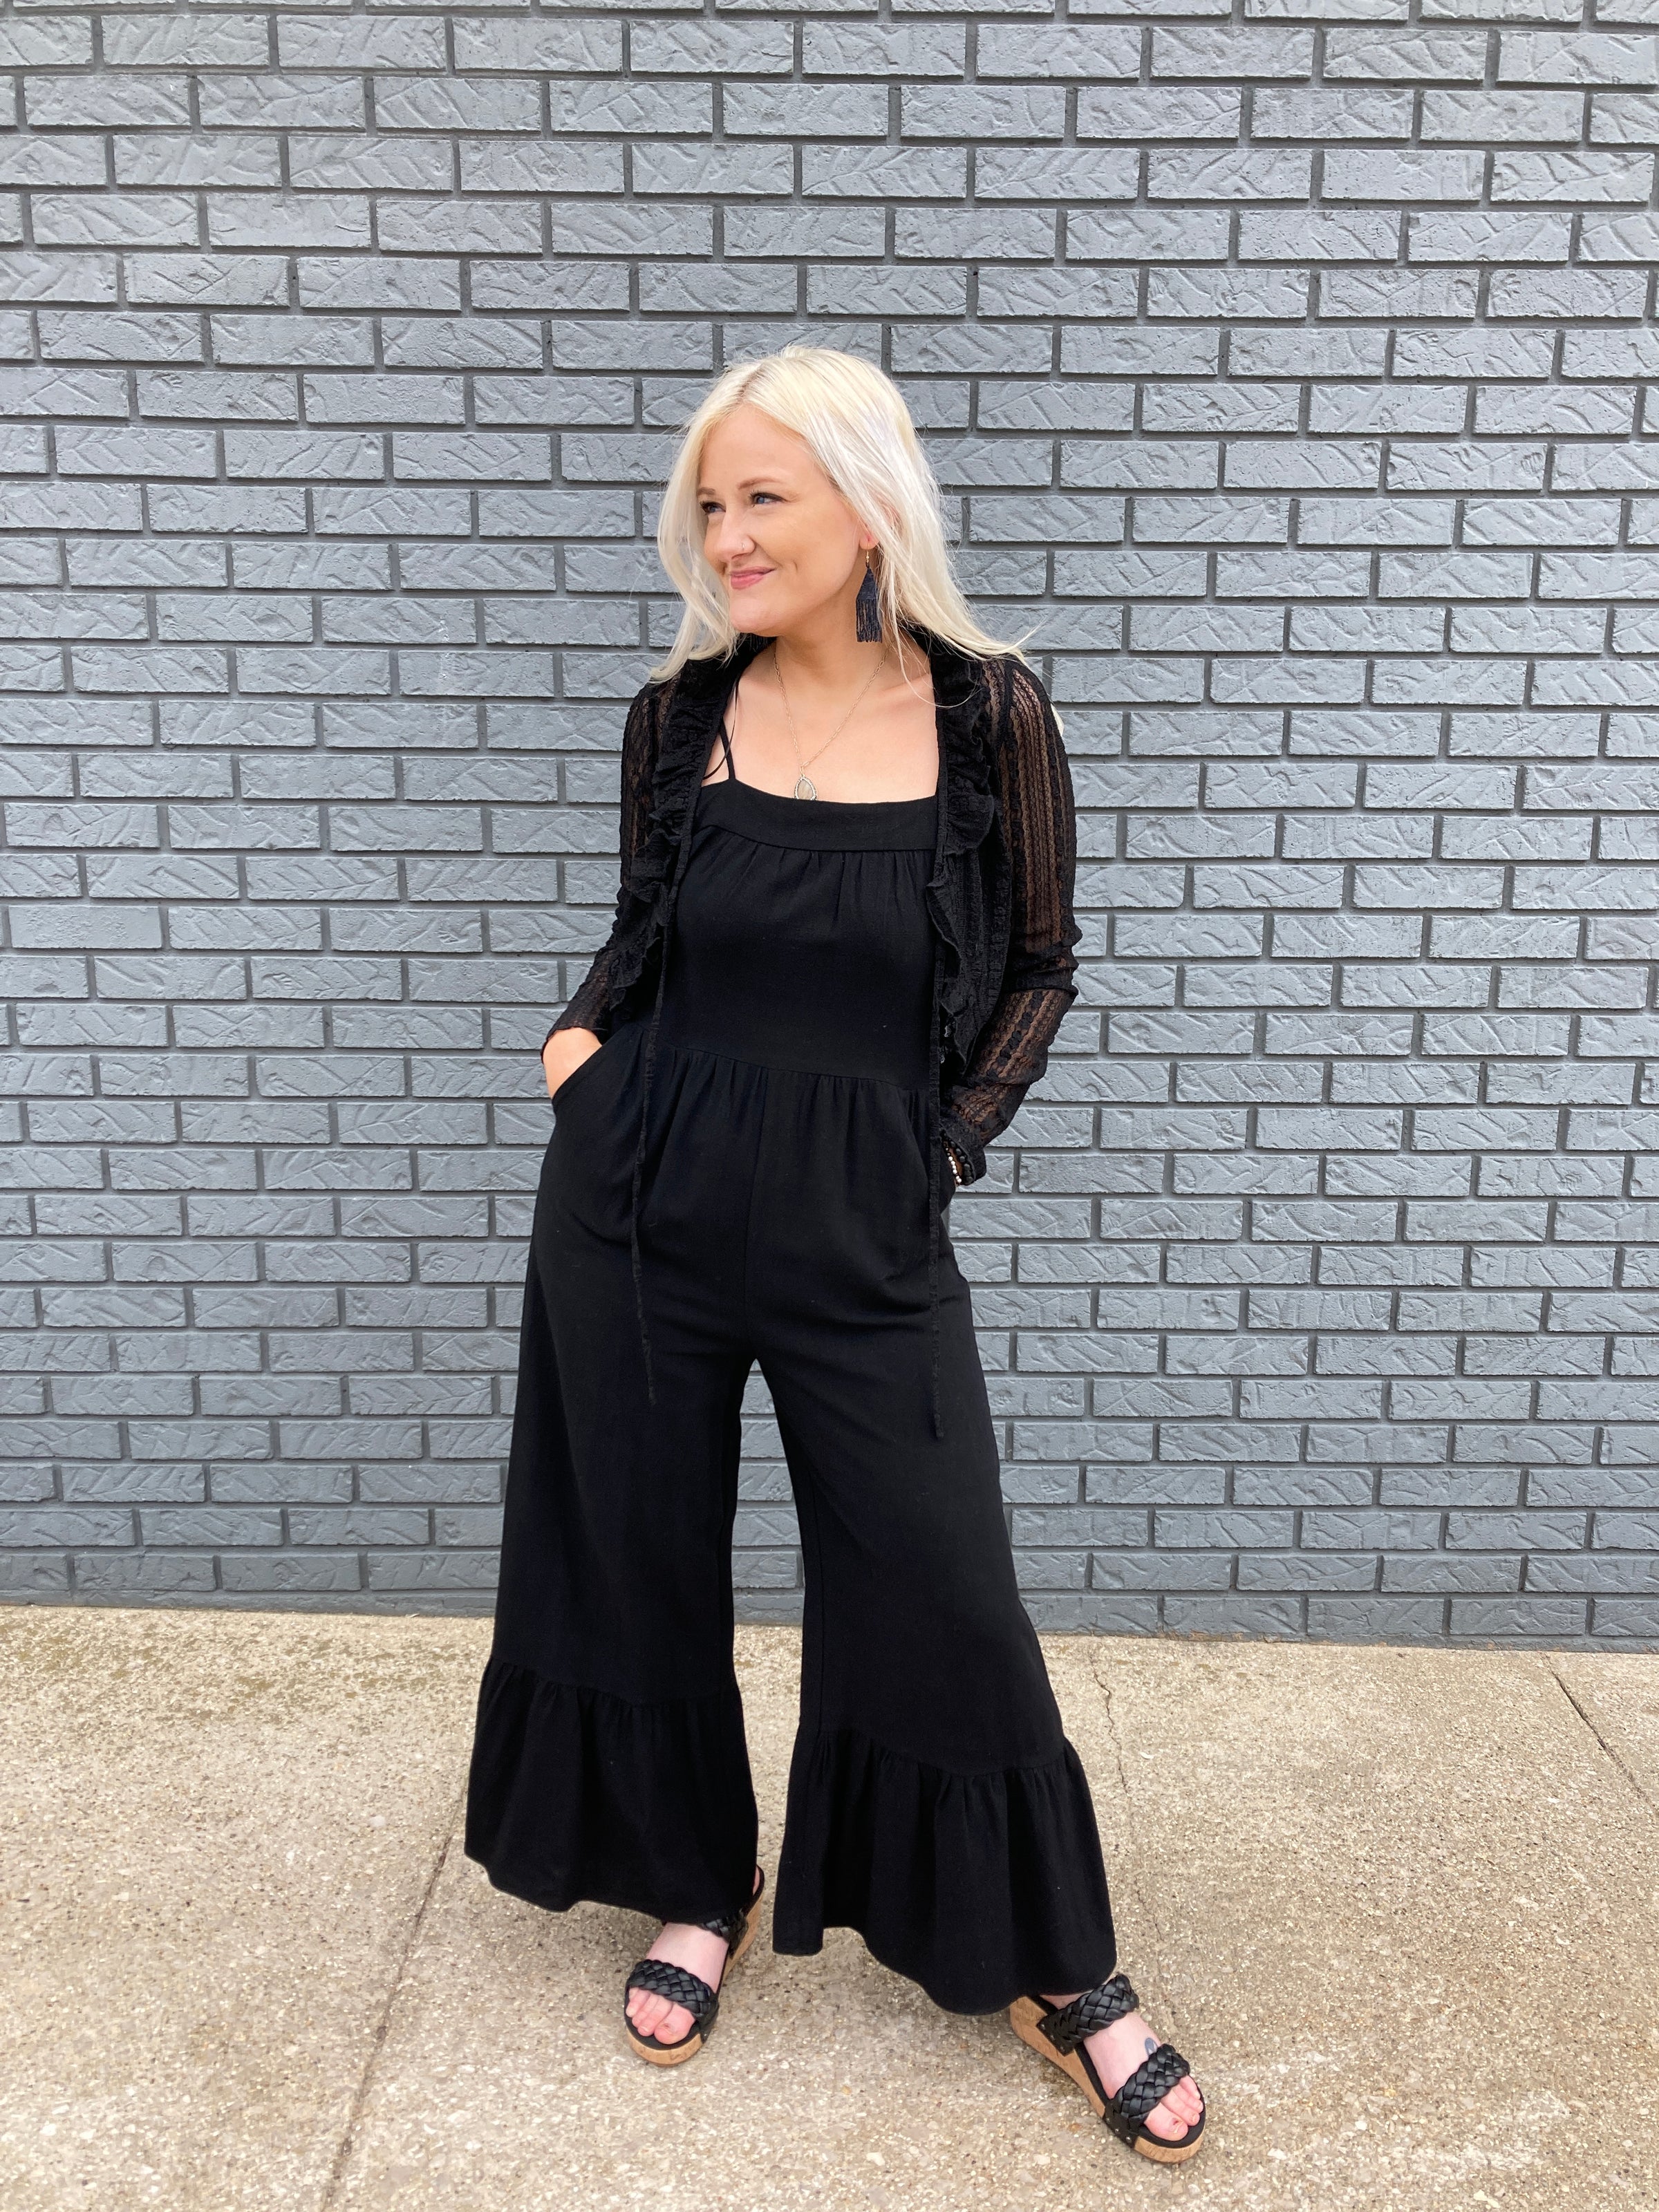 A gorgeous 30 something woman in a stunning wide leg black jumpsuit.